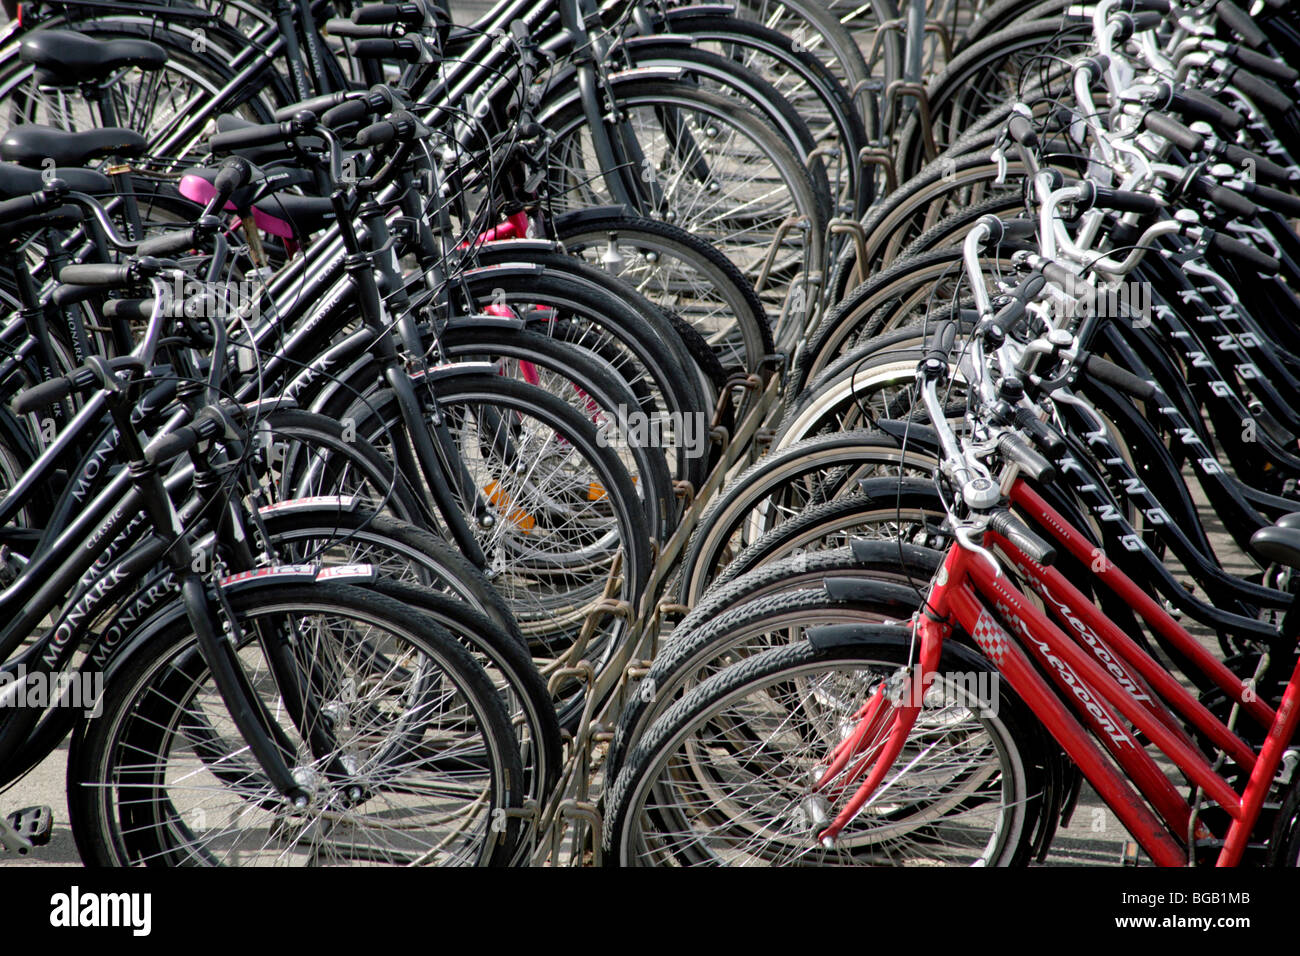 TOURIST BIKES, STOCKHOLM: Parked up lines of tourist hire bicycles cycles in Gamla Stan Old Town Stockholm Sweden Stock Photo